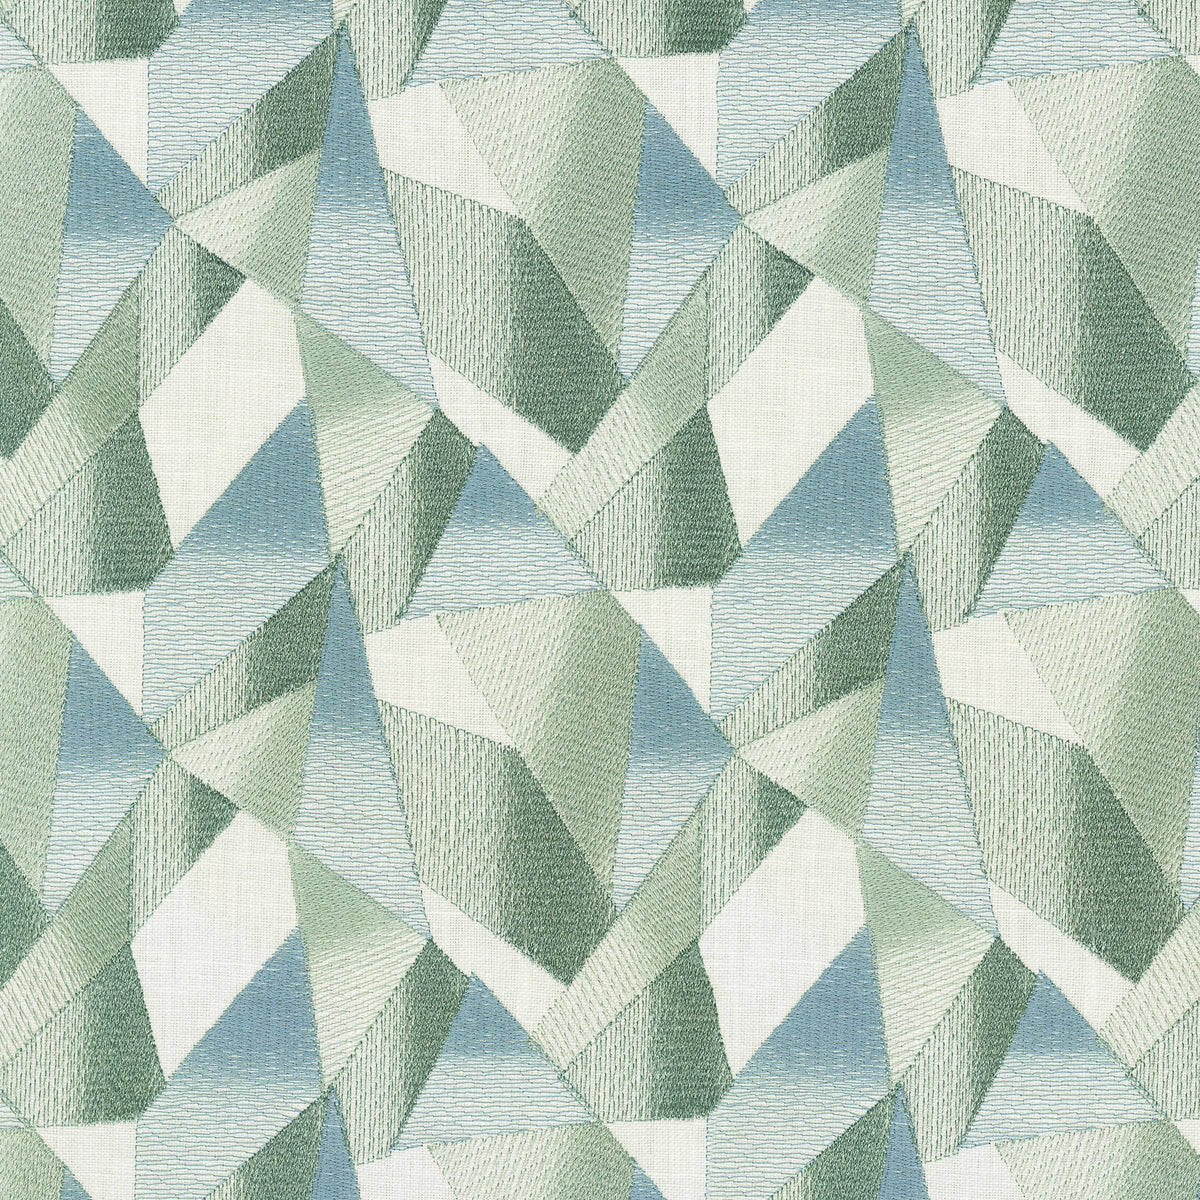 P/K Lifestyles Prism Embroidery - Aquamarine 411443 Upholstery Fabric